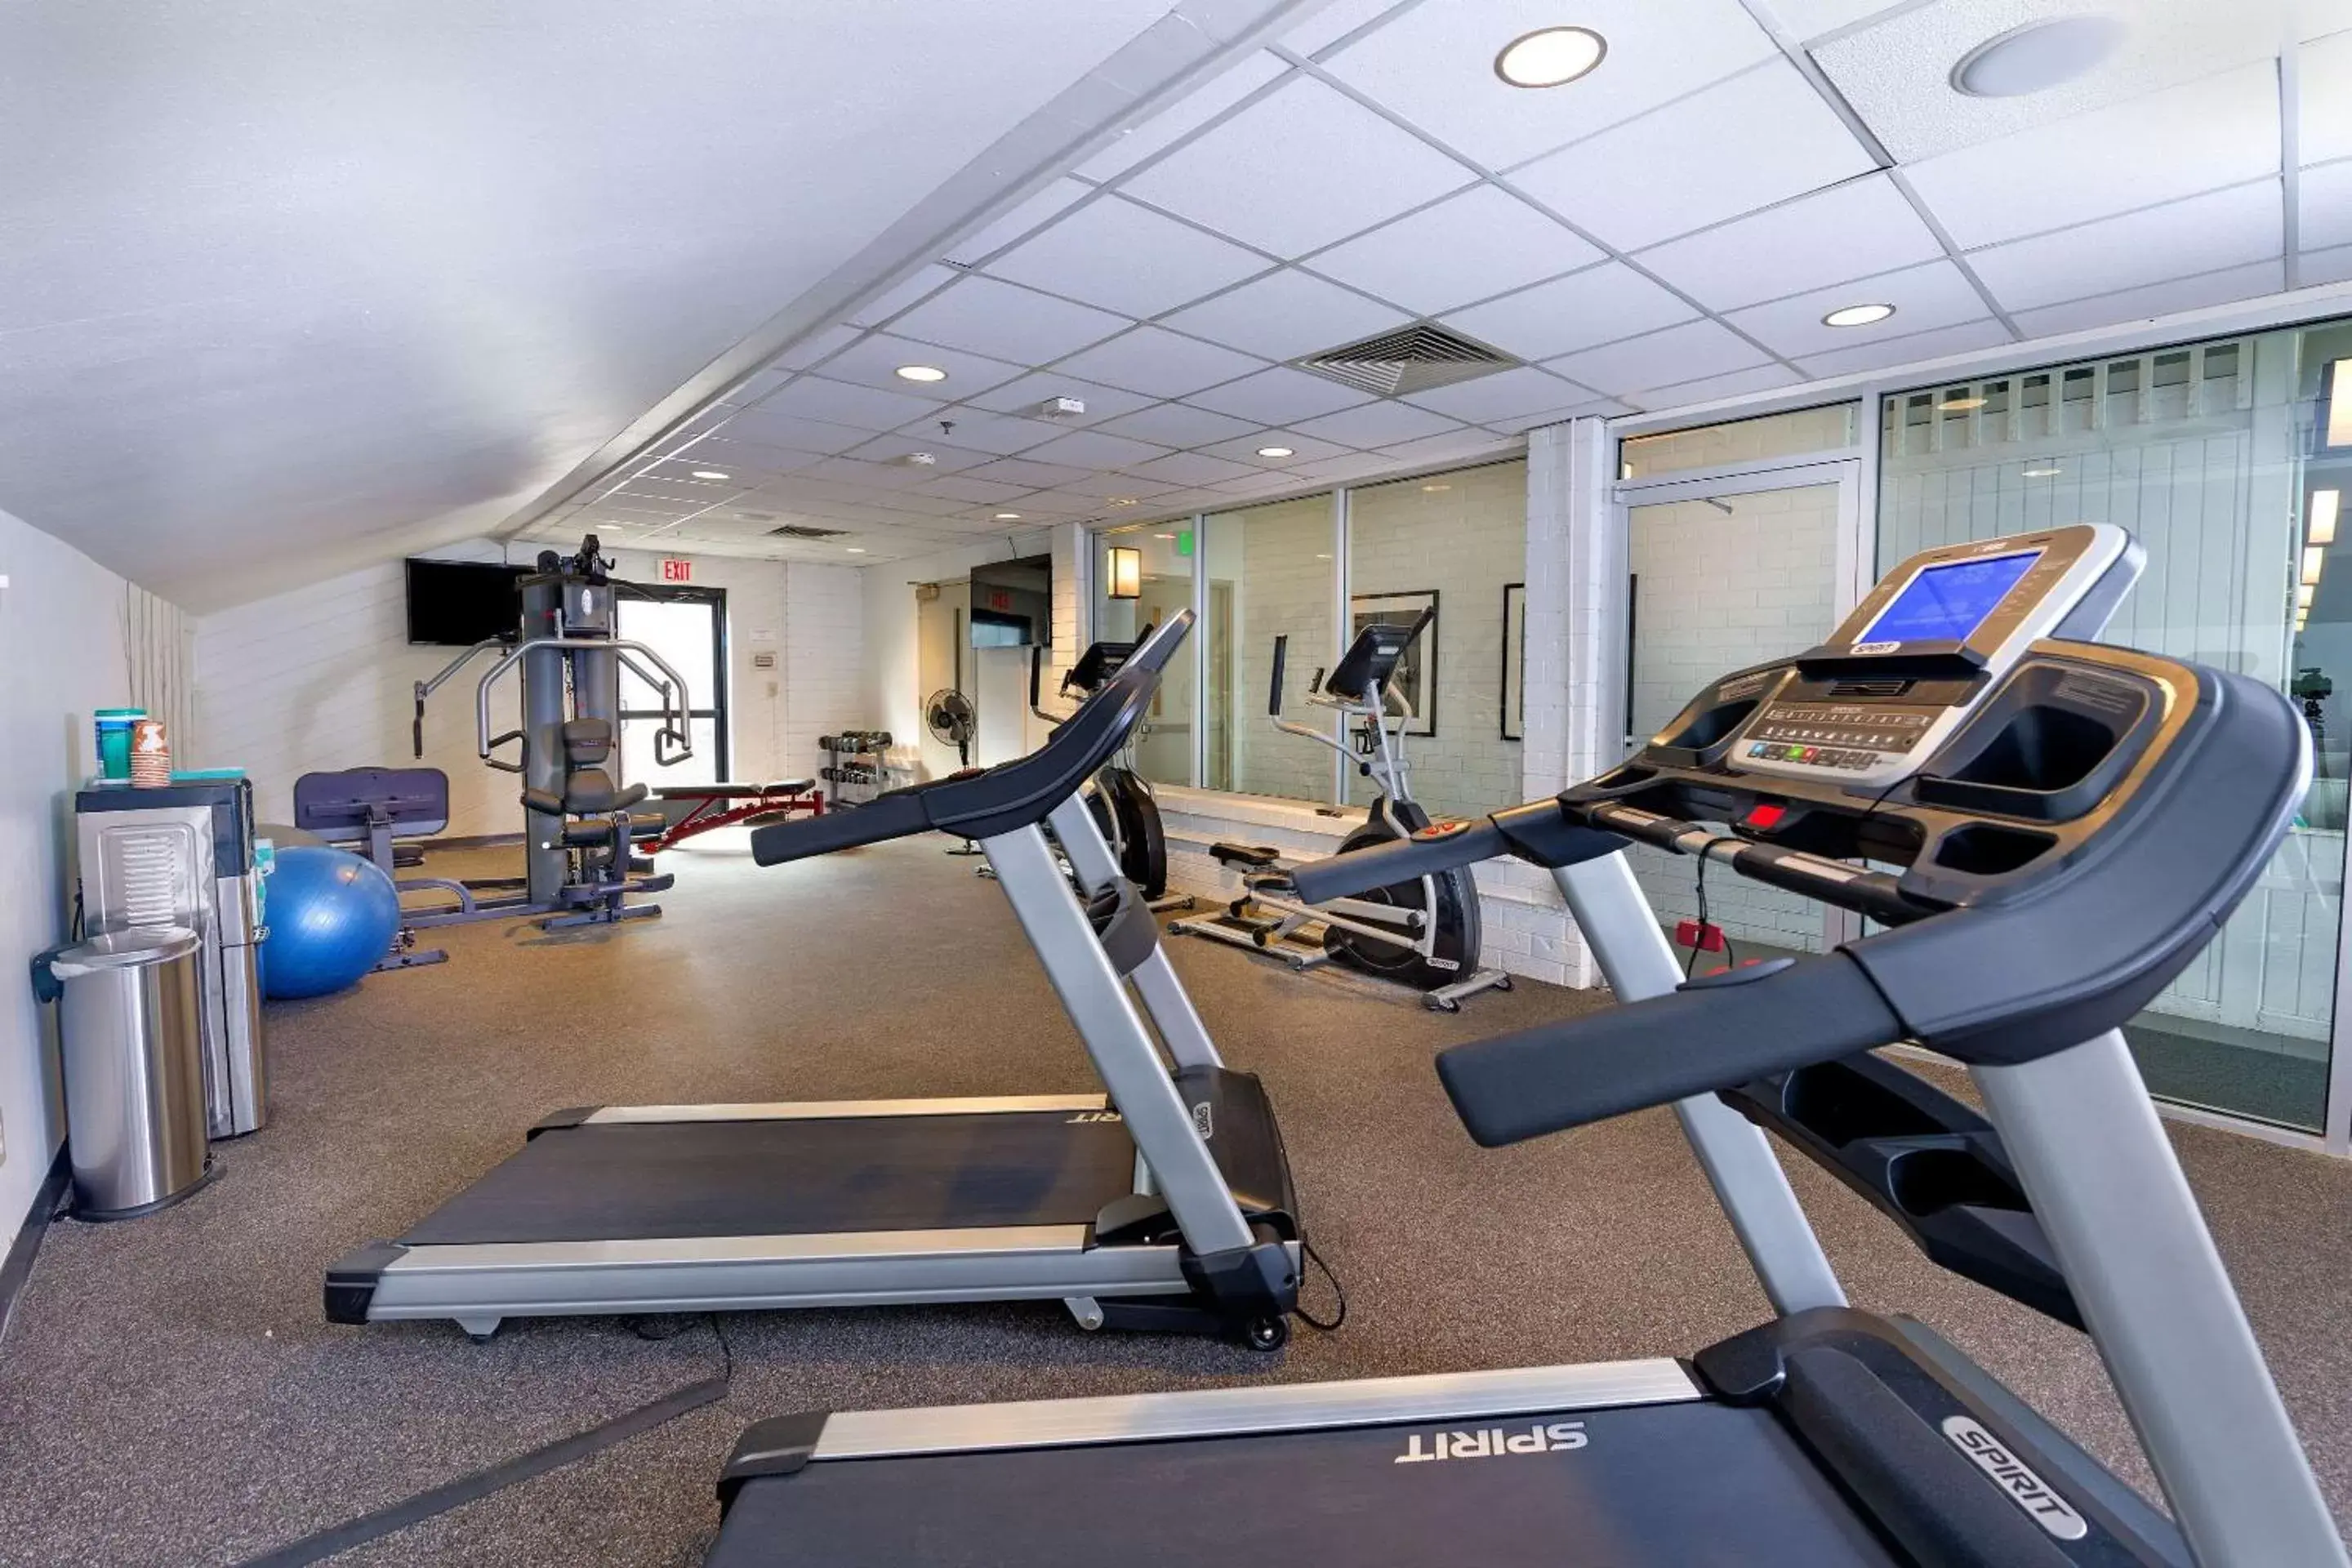 Fitness centre/facilities, Fitness Center/Facilities in The Ridgeline Hotel, Estes Park, Ascend Hotel Collection